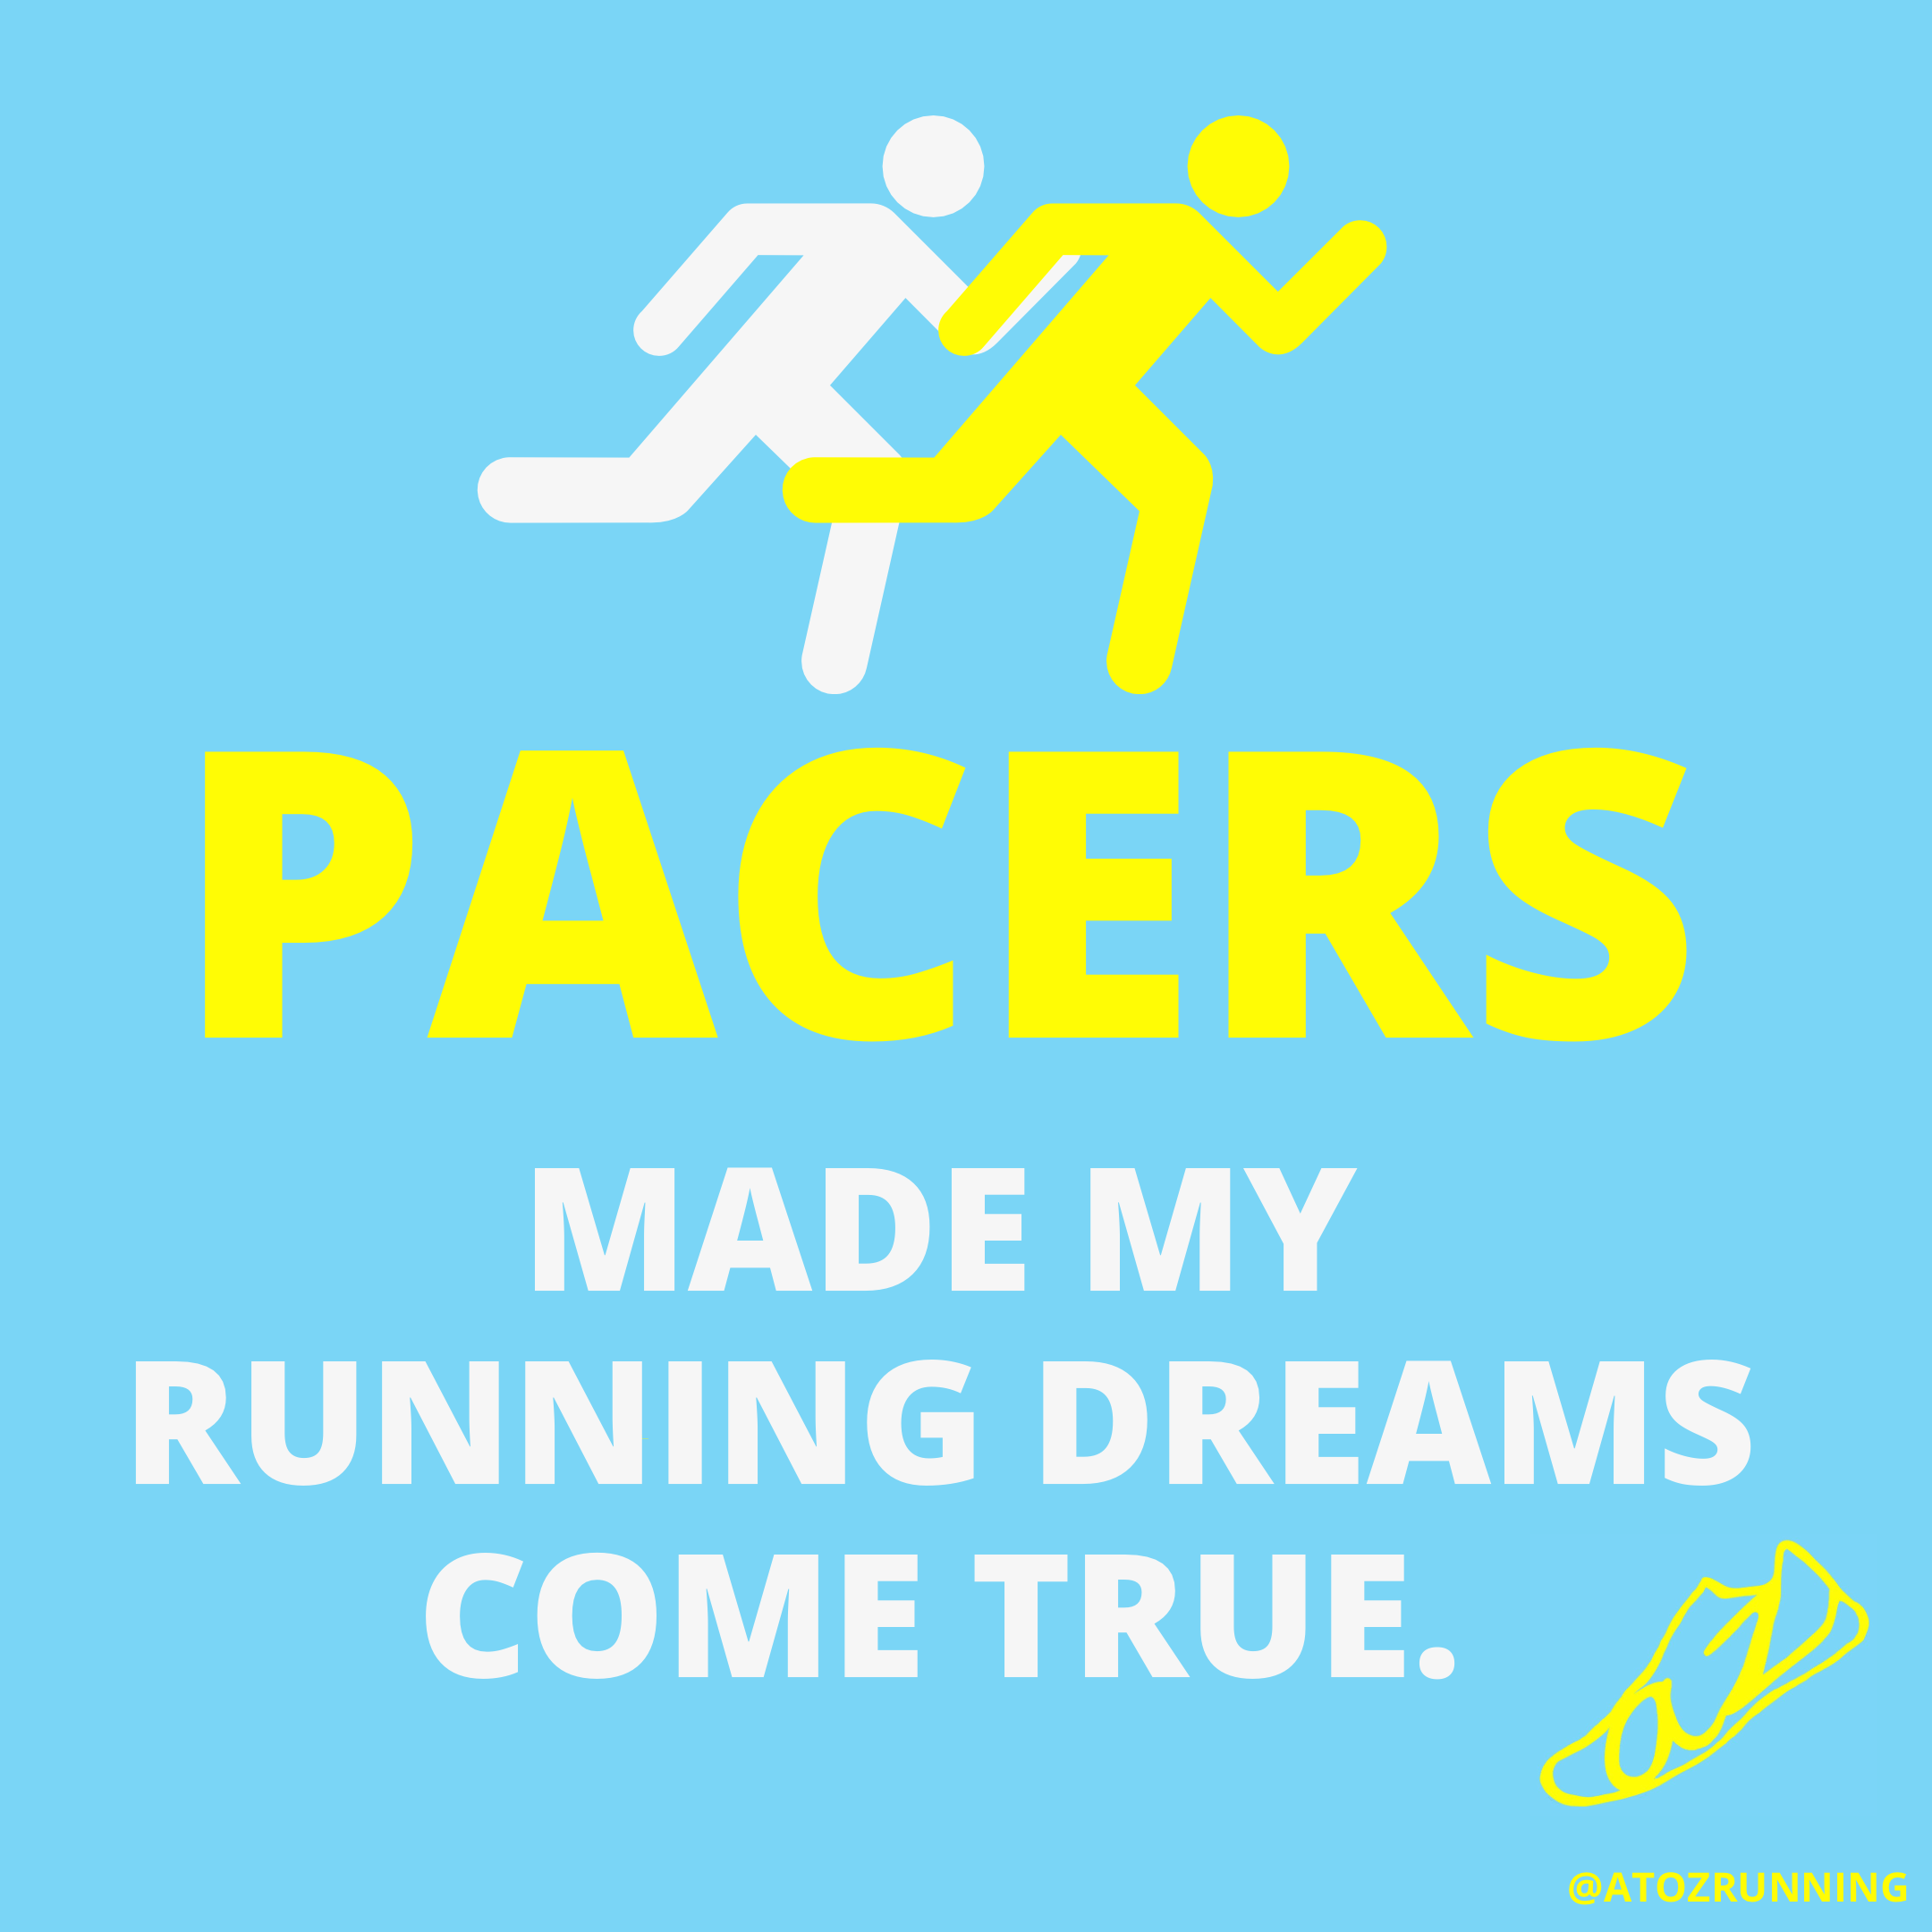 Pacers made my running dreams come true